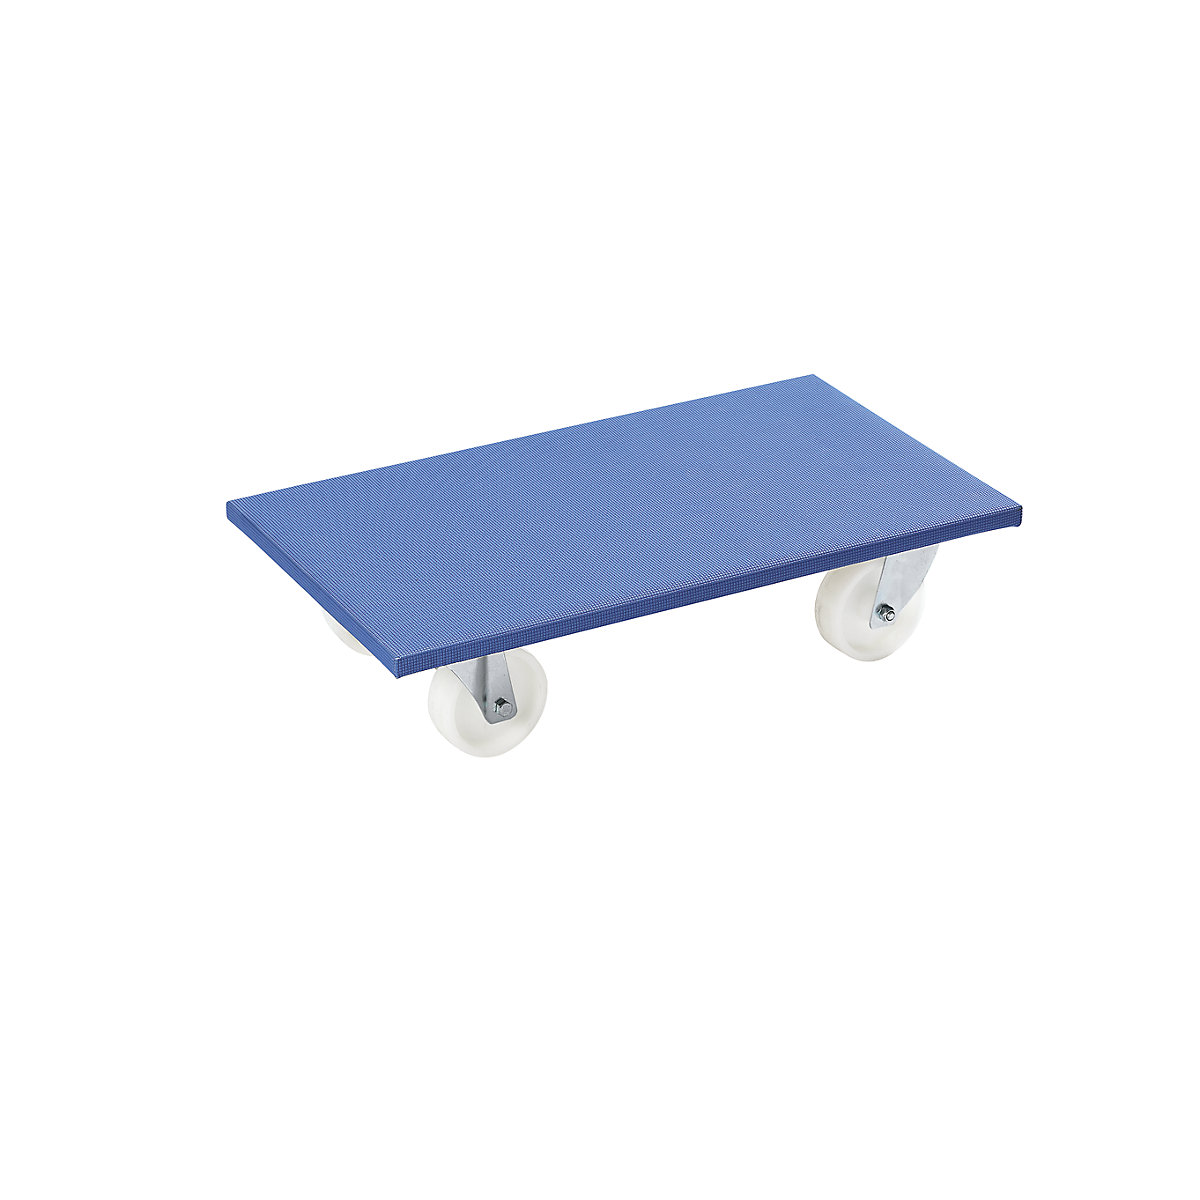 Furniture dolly, LxWxH 600 x 350 x 145 mm, pack of 2, max. load 500 kg, 5+ packs-7